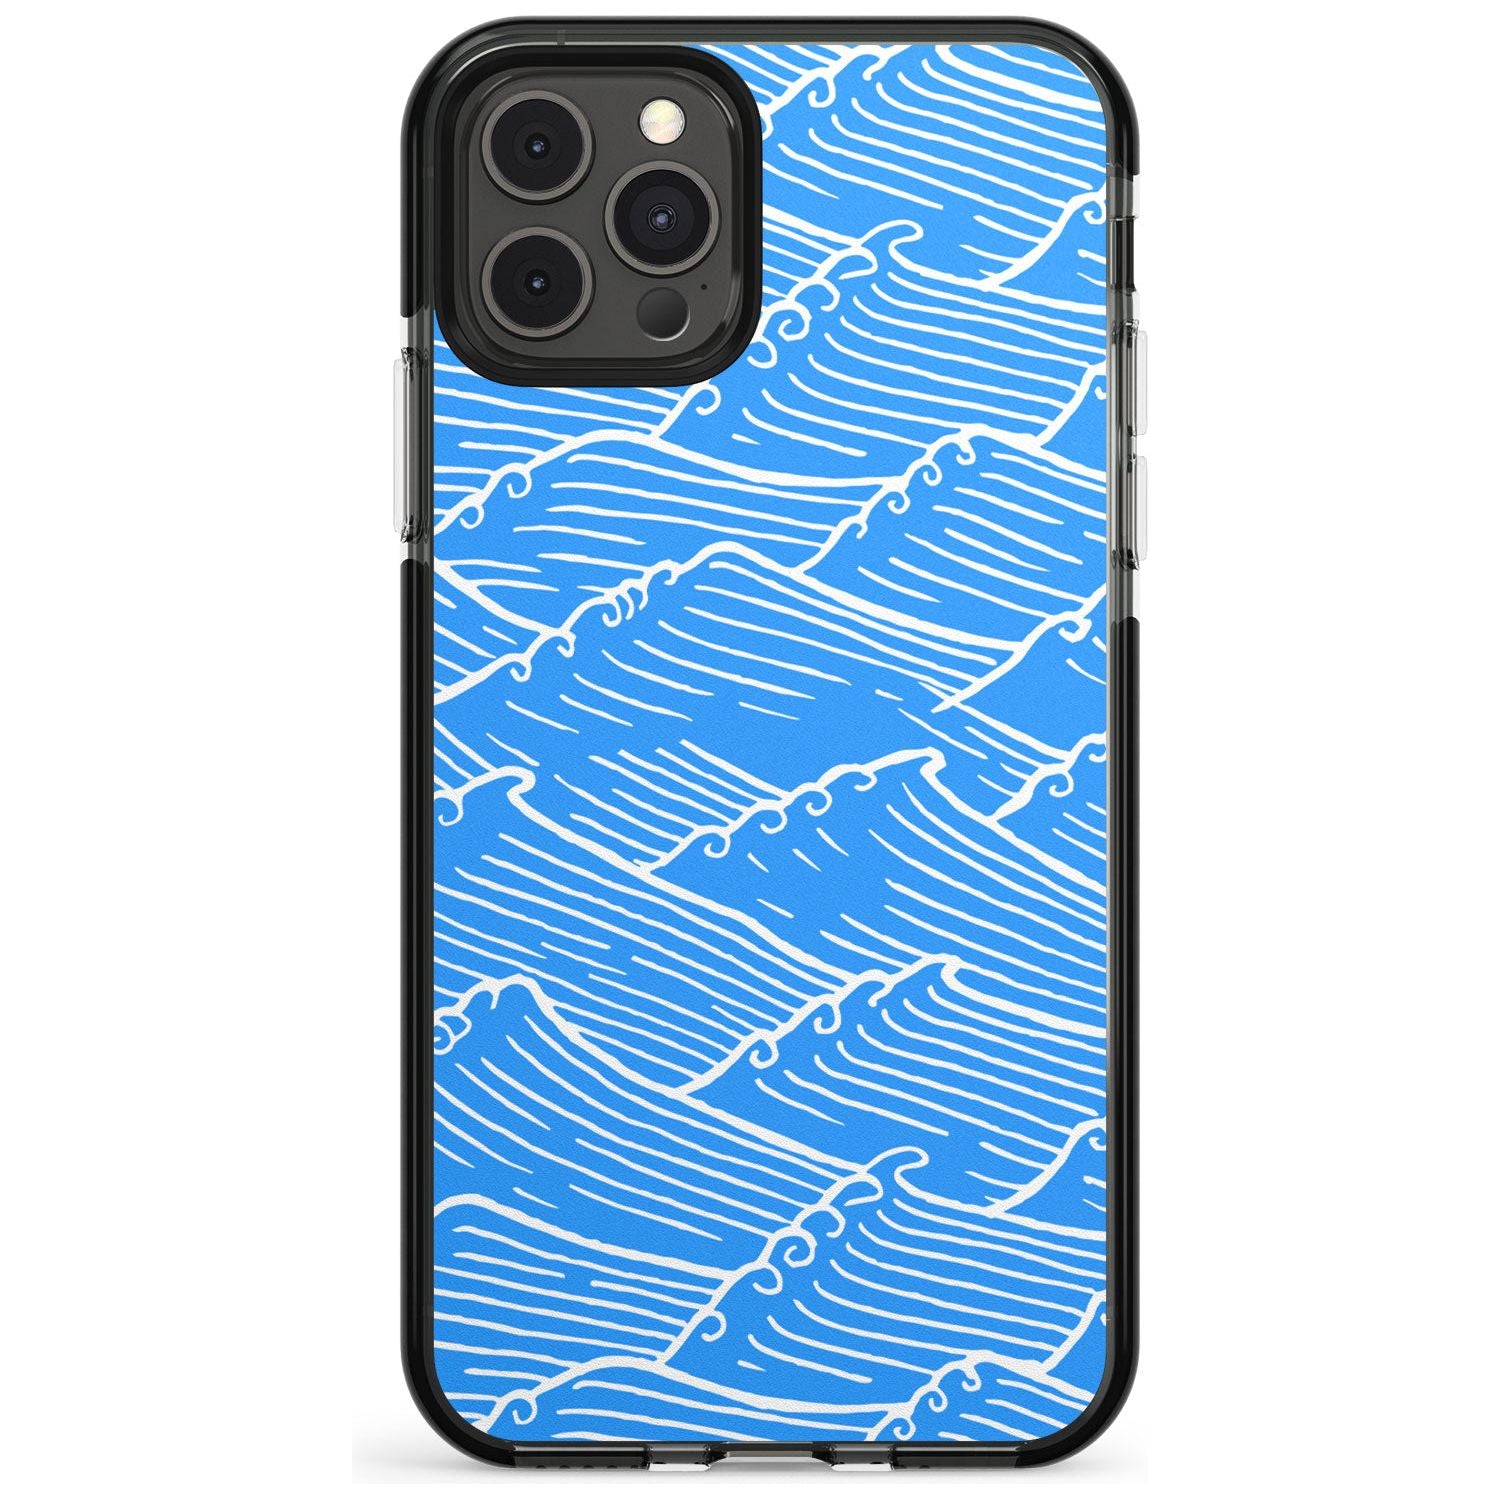 Waves Pattern Black Impact Phone Case for iPhone 11